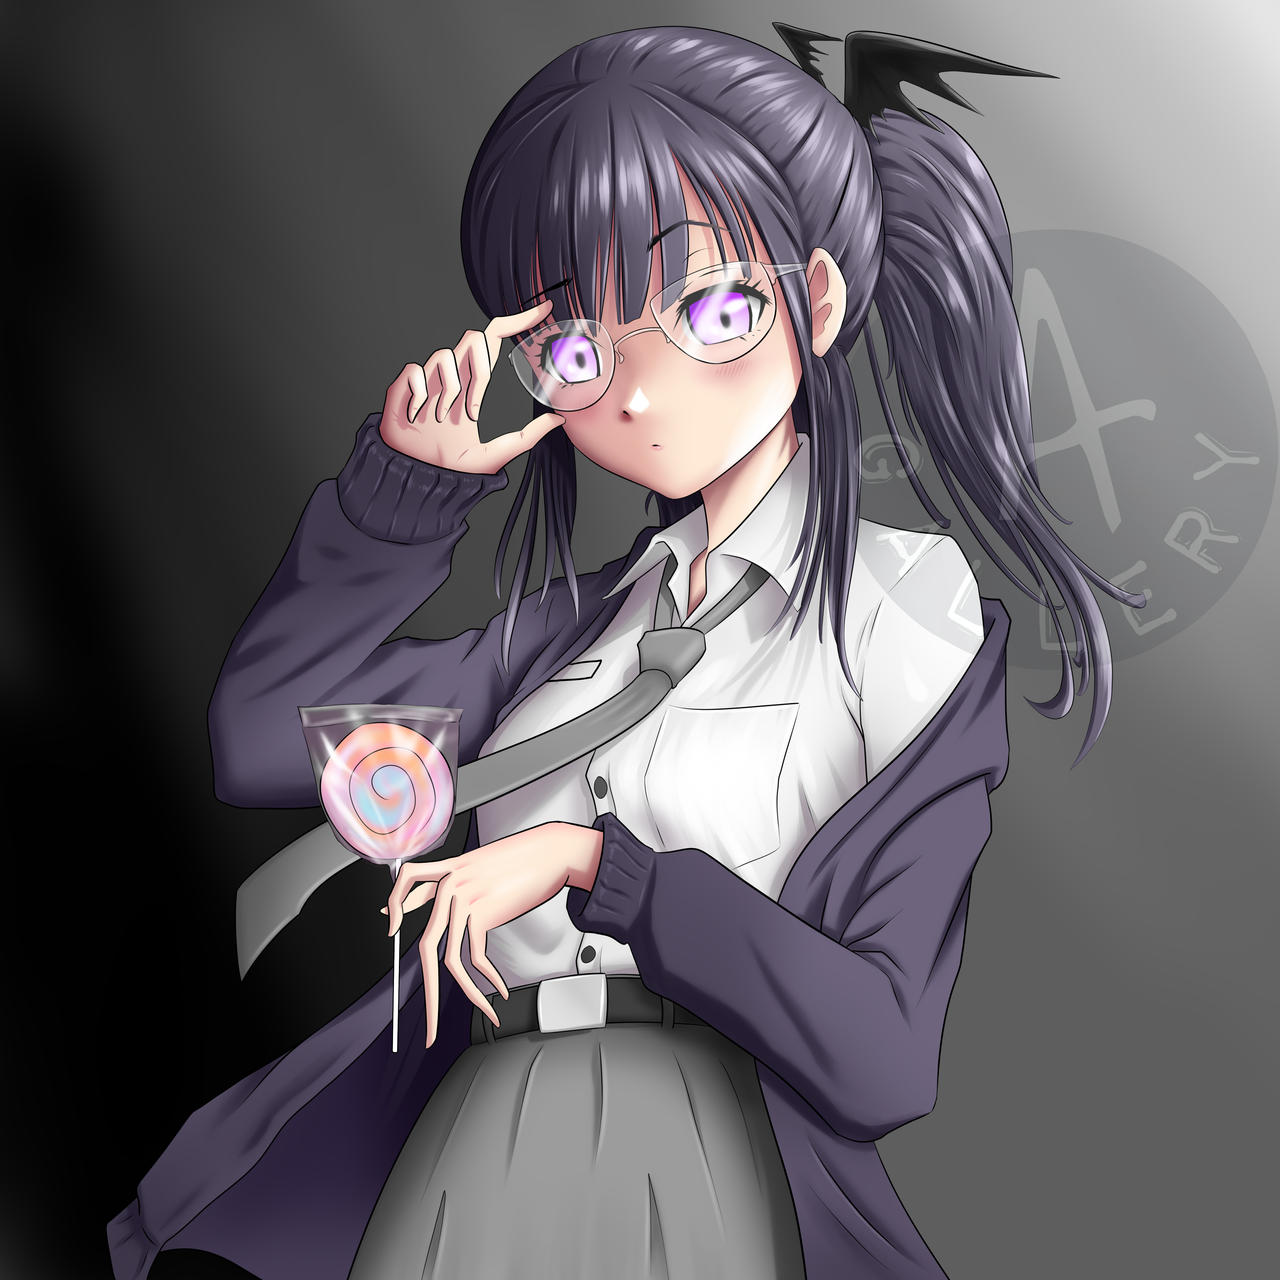 OC ANIME CUTE GIRL CHARACTER by Allydity2412 on DeviantArt